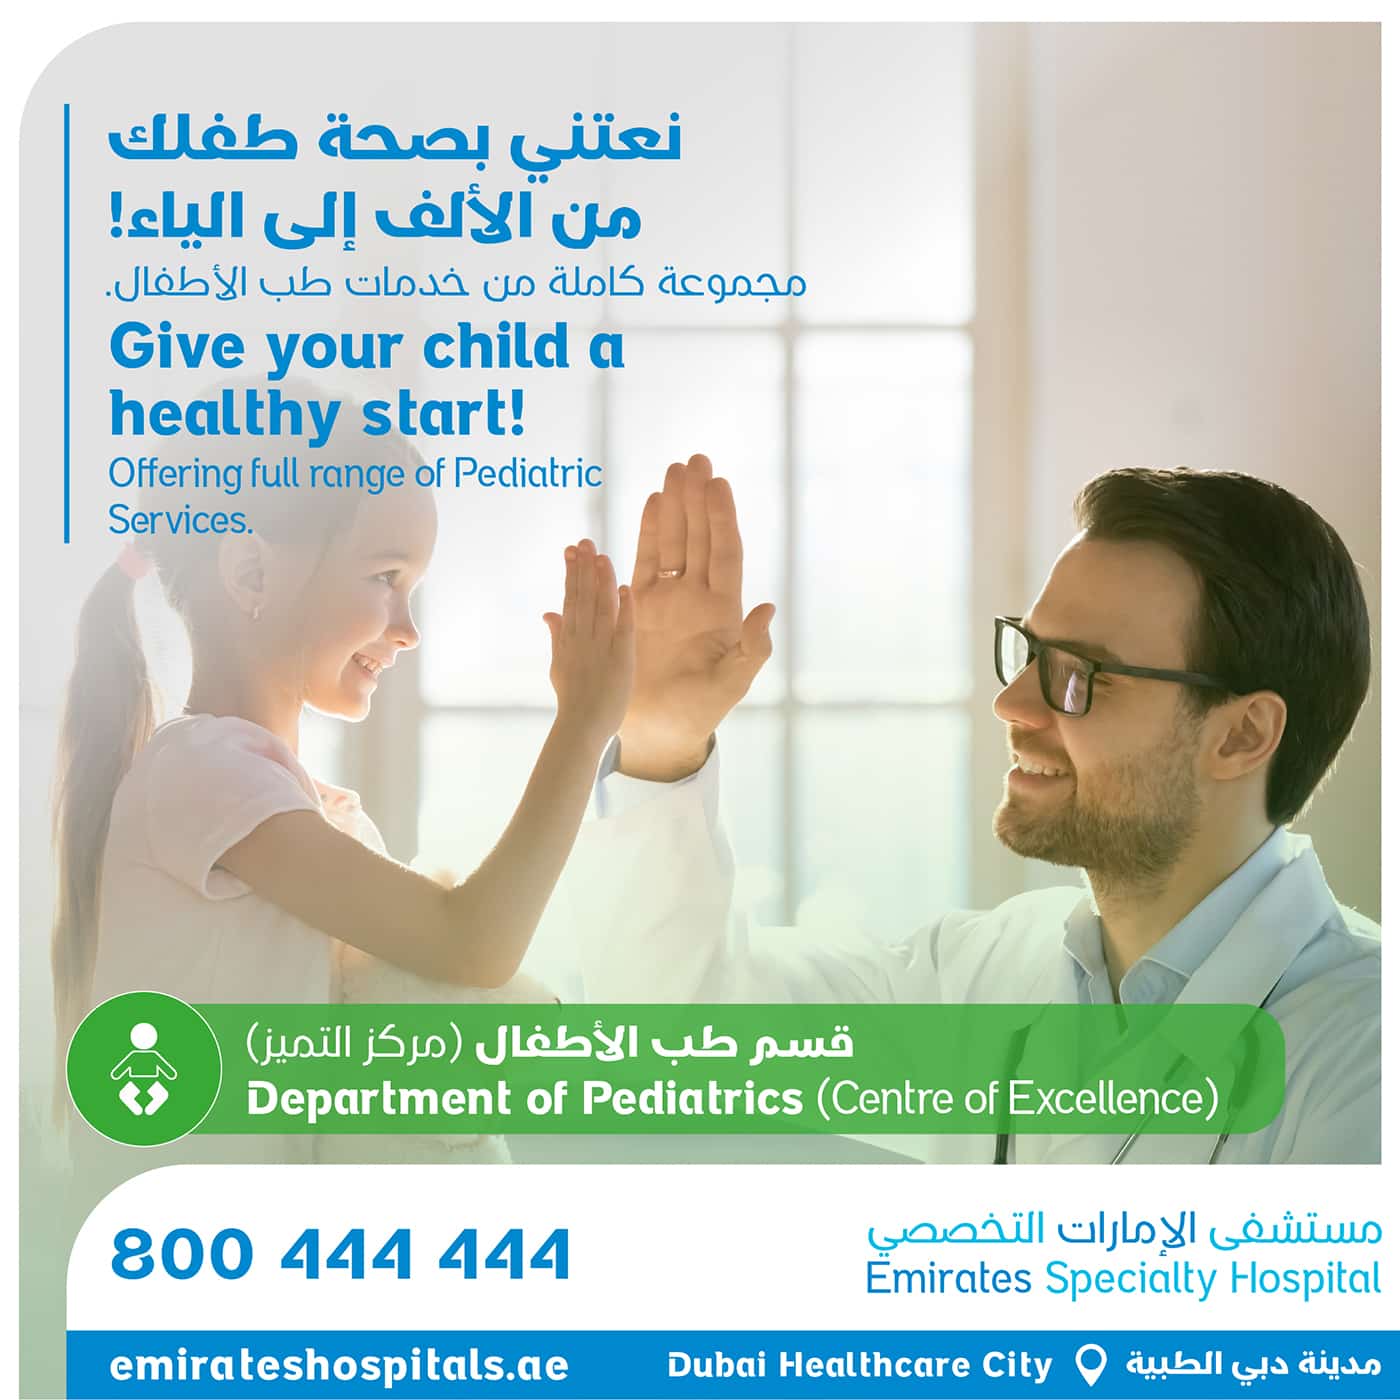 Give your child a healthy Start